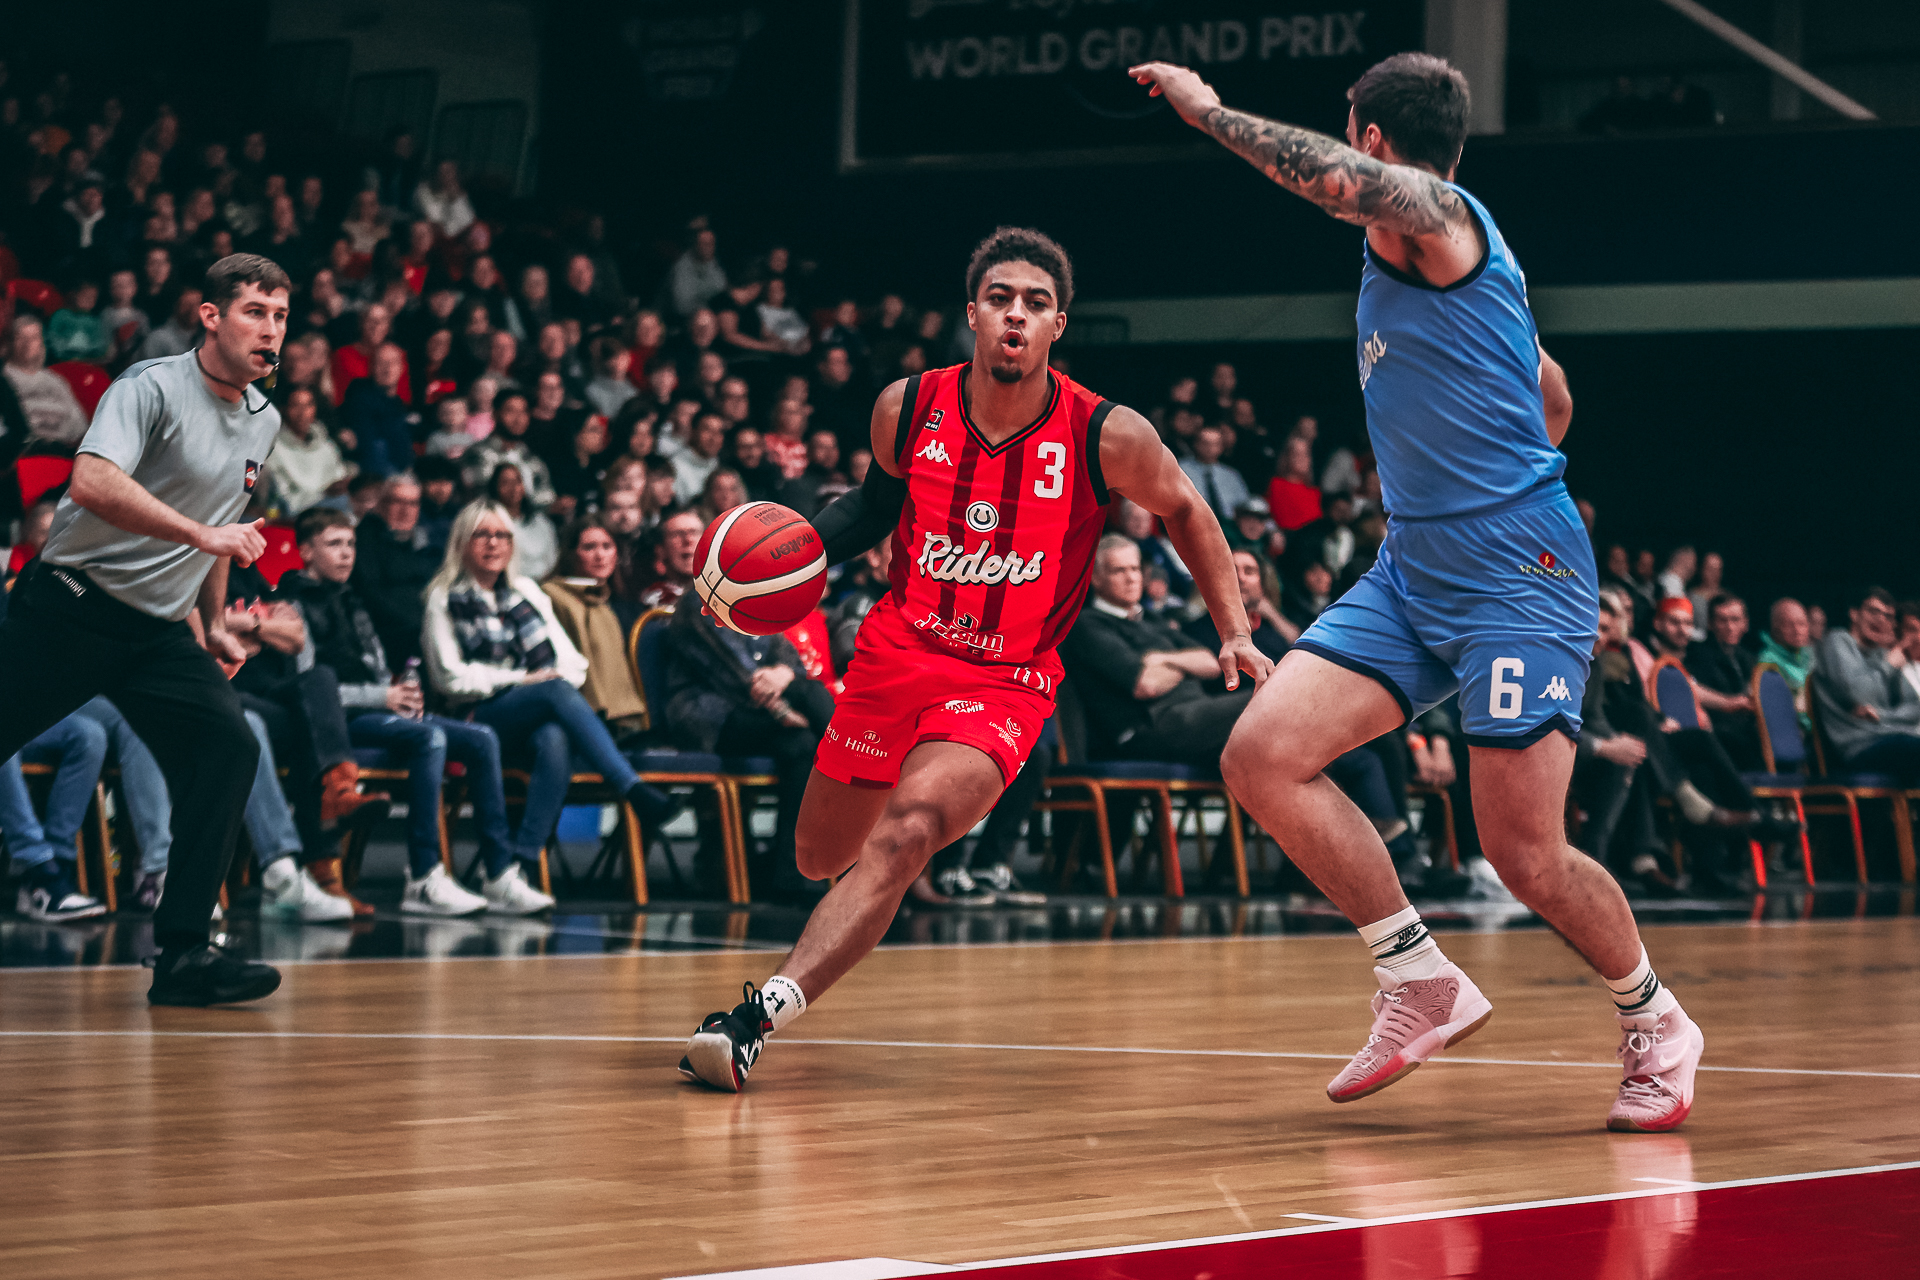 Leicester Riders' Derryck Thornton playing against the Caledonia Gladiators